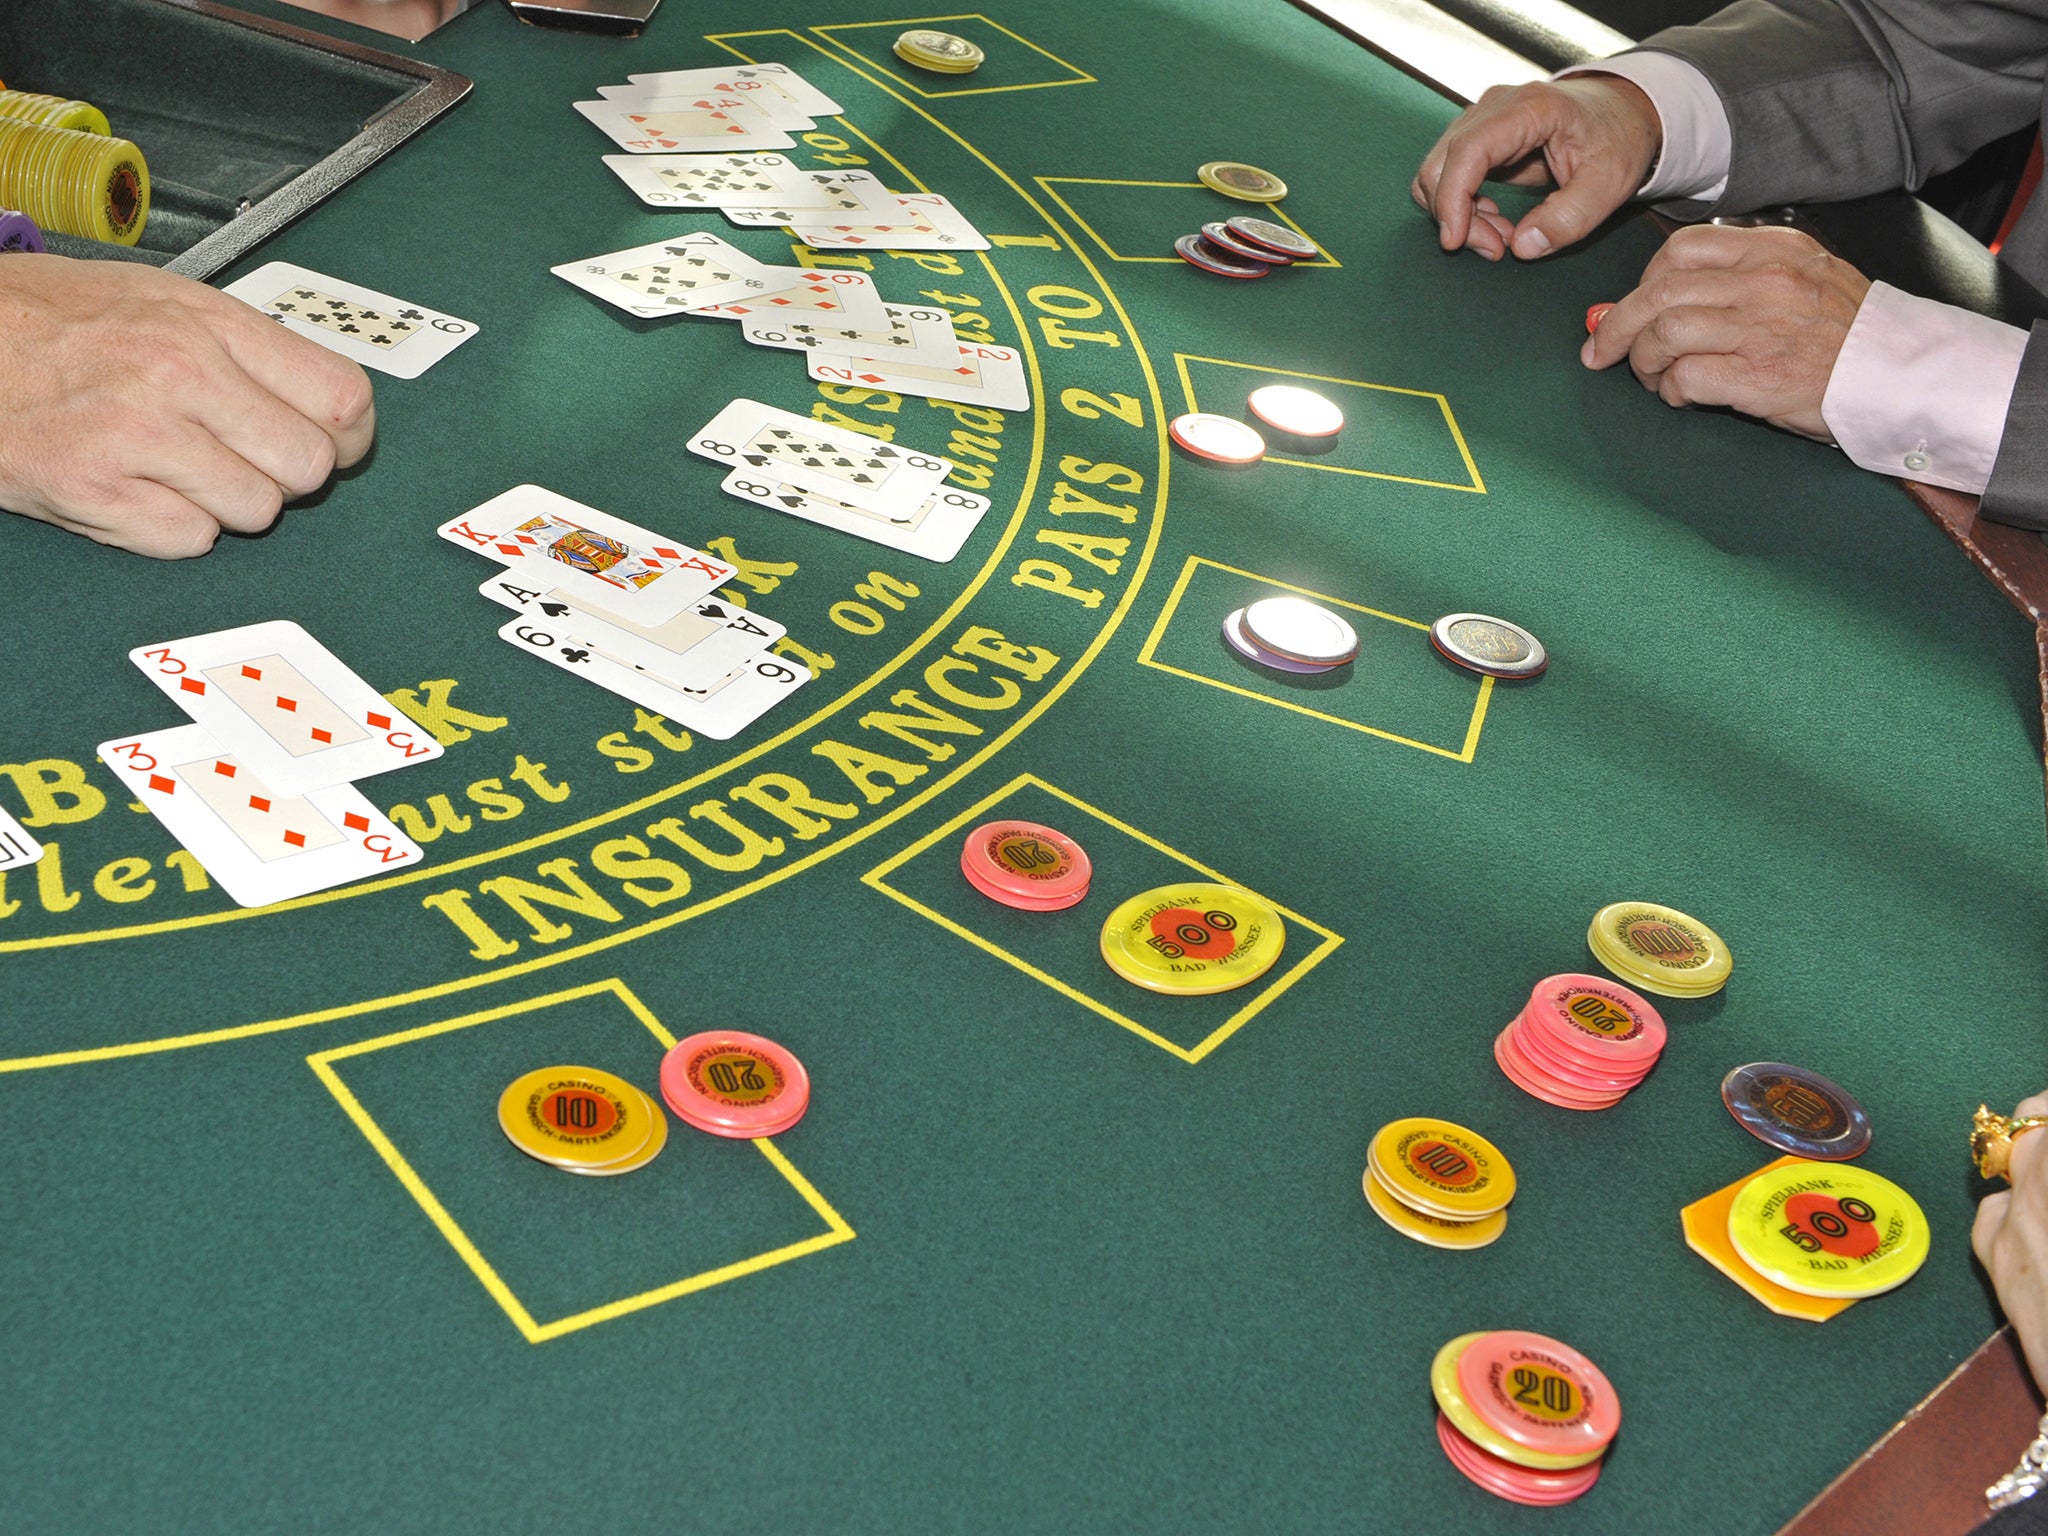 Black Jack is the most widely played casino game as players only play against the banker and not each other